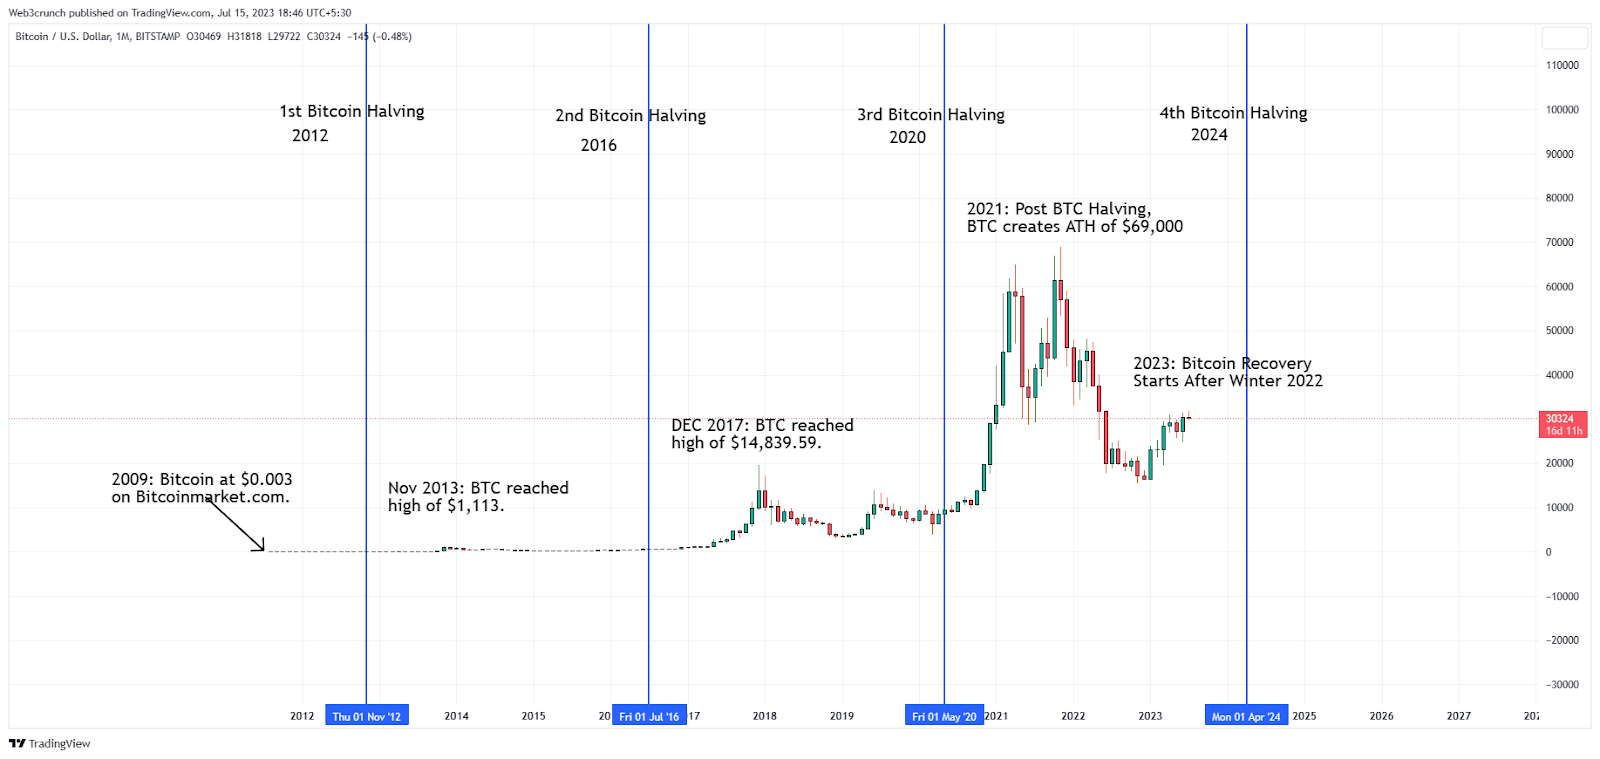 Crypto News: Why Is Bitcoin's Price Rising?